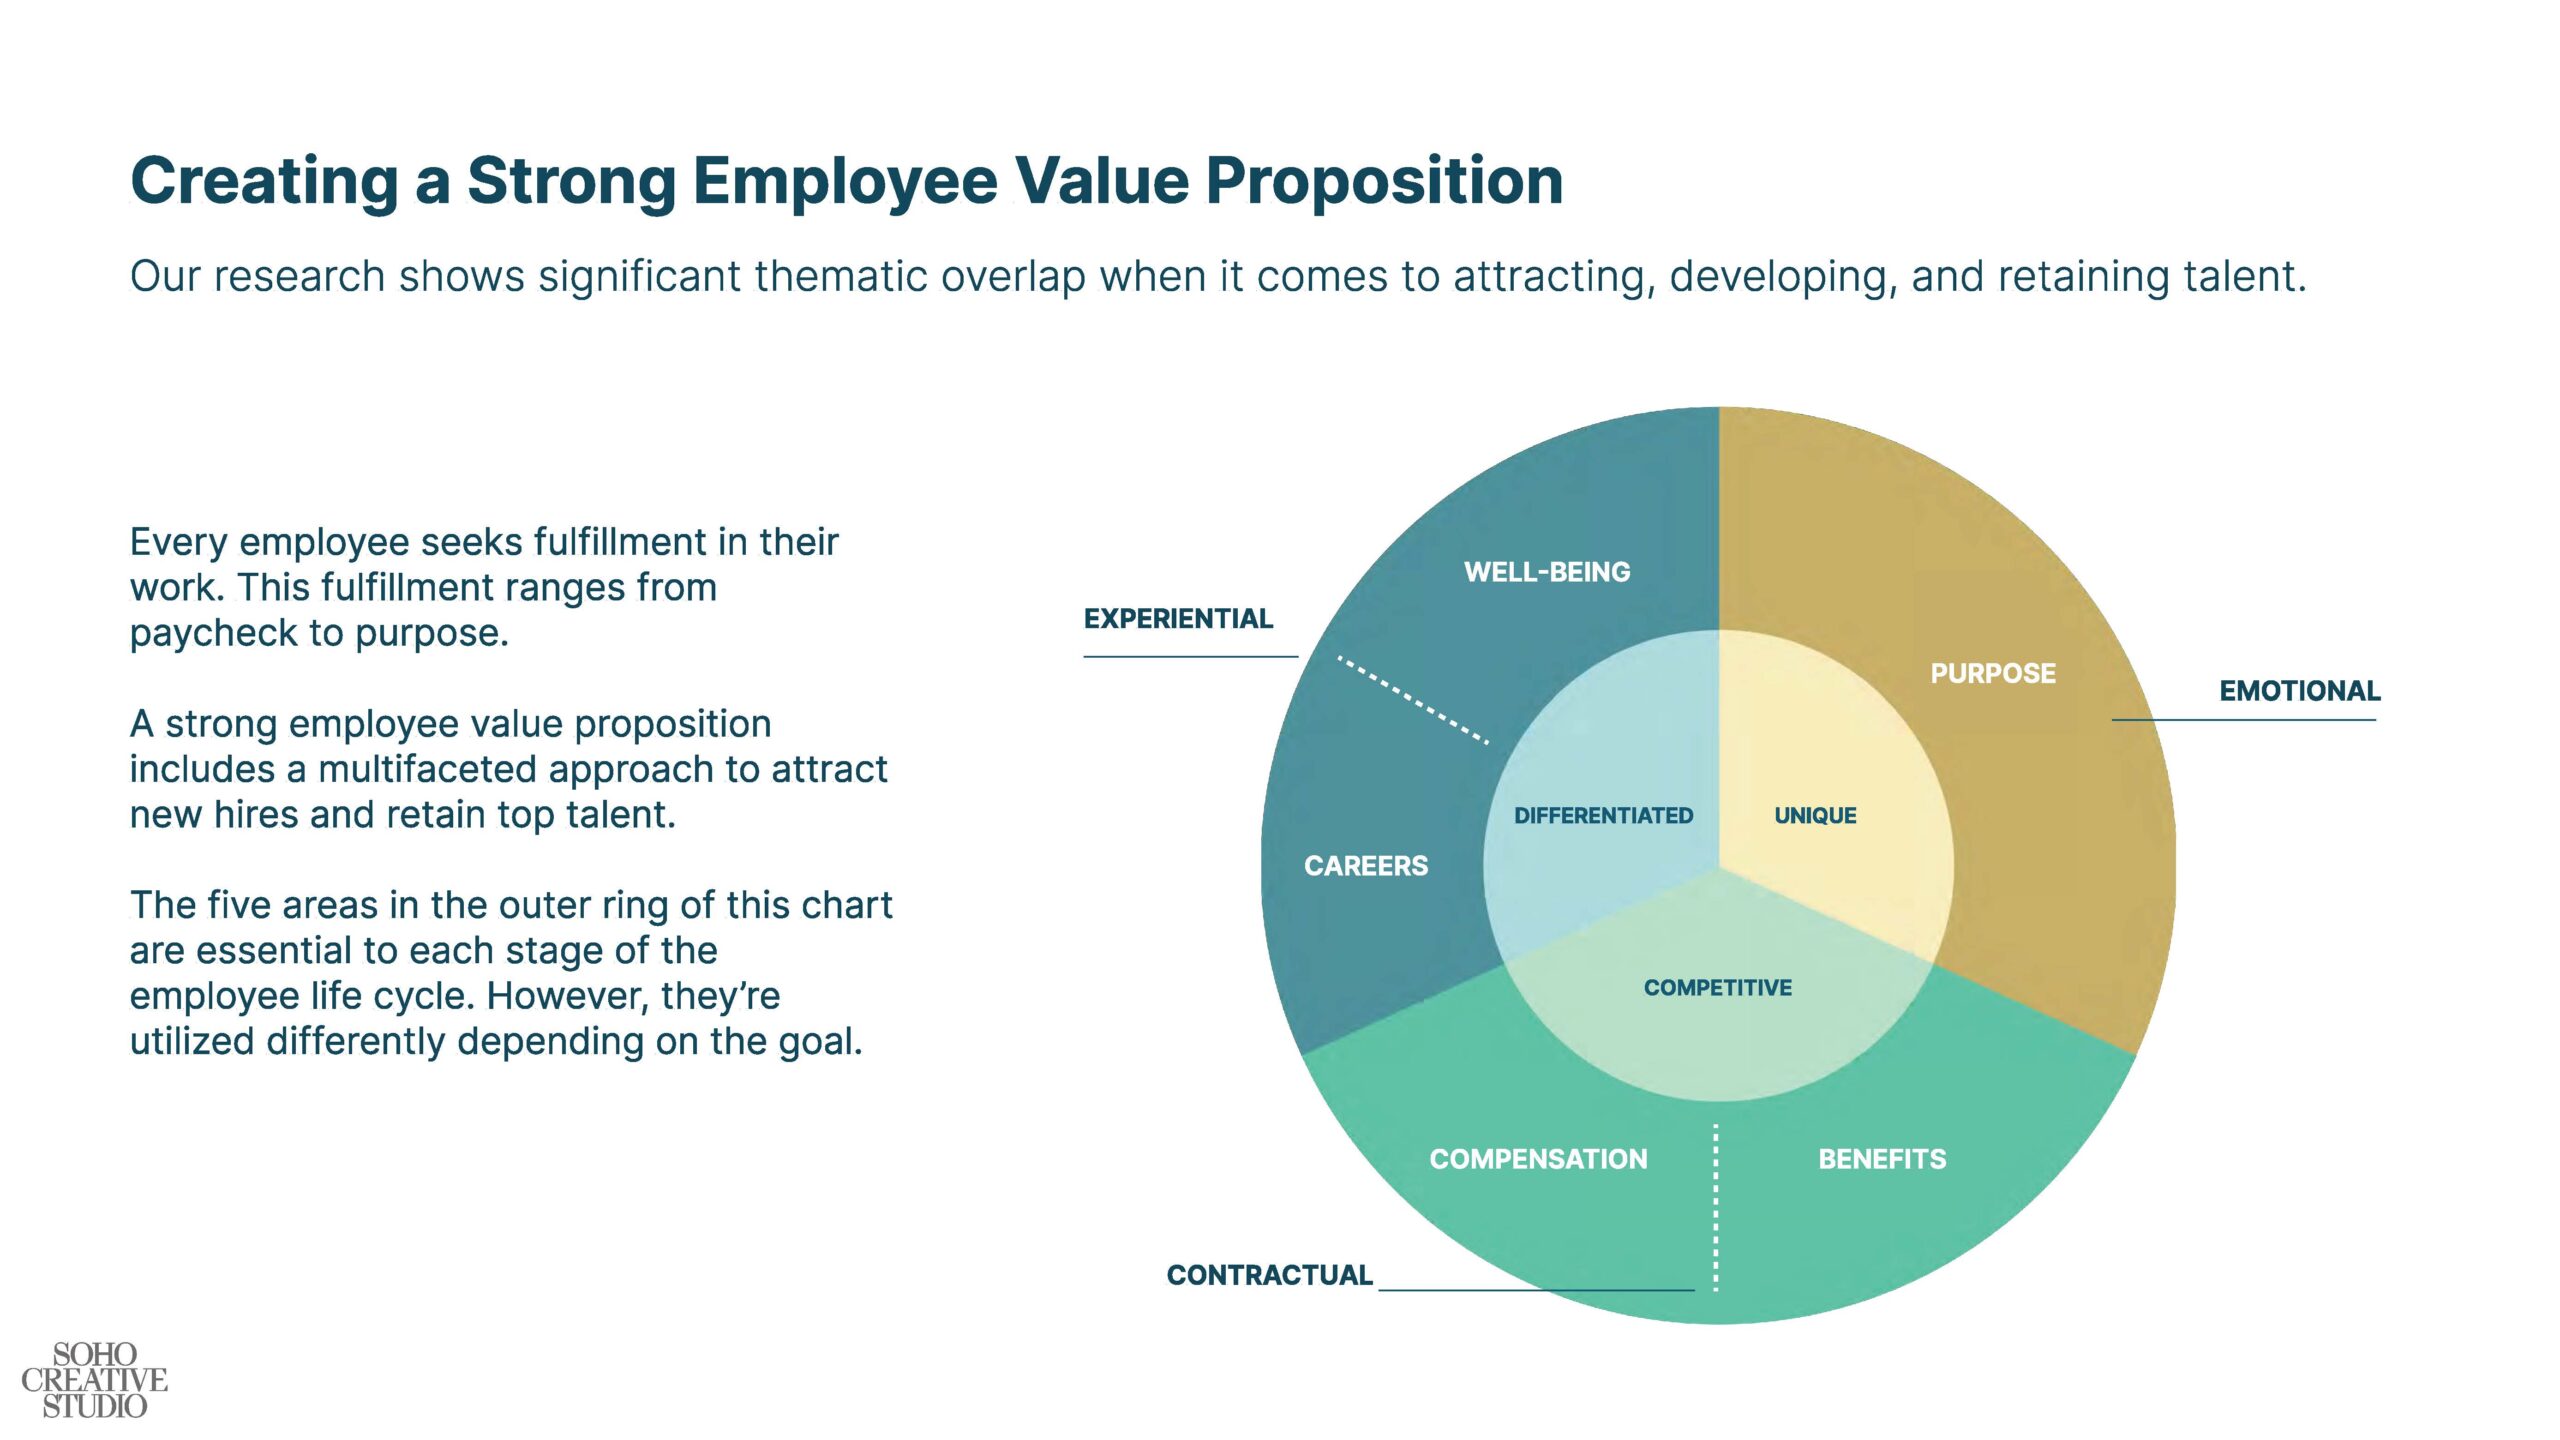 Employee Value Proposition wheel showing the areas of Attracting, Developing and Retaining Employees